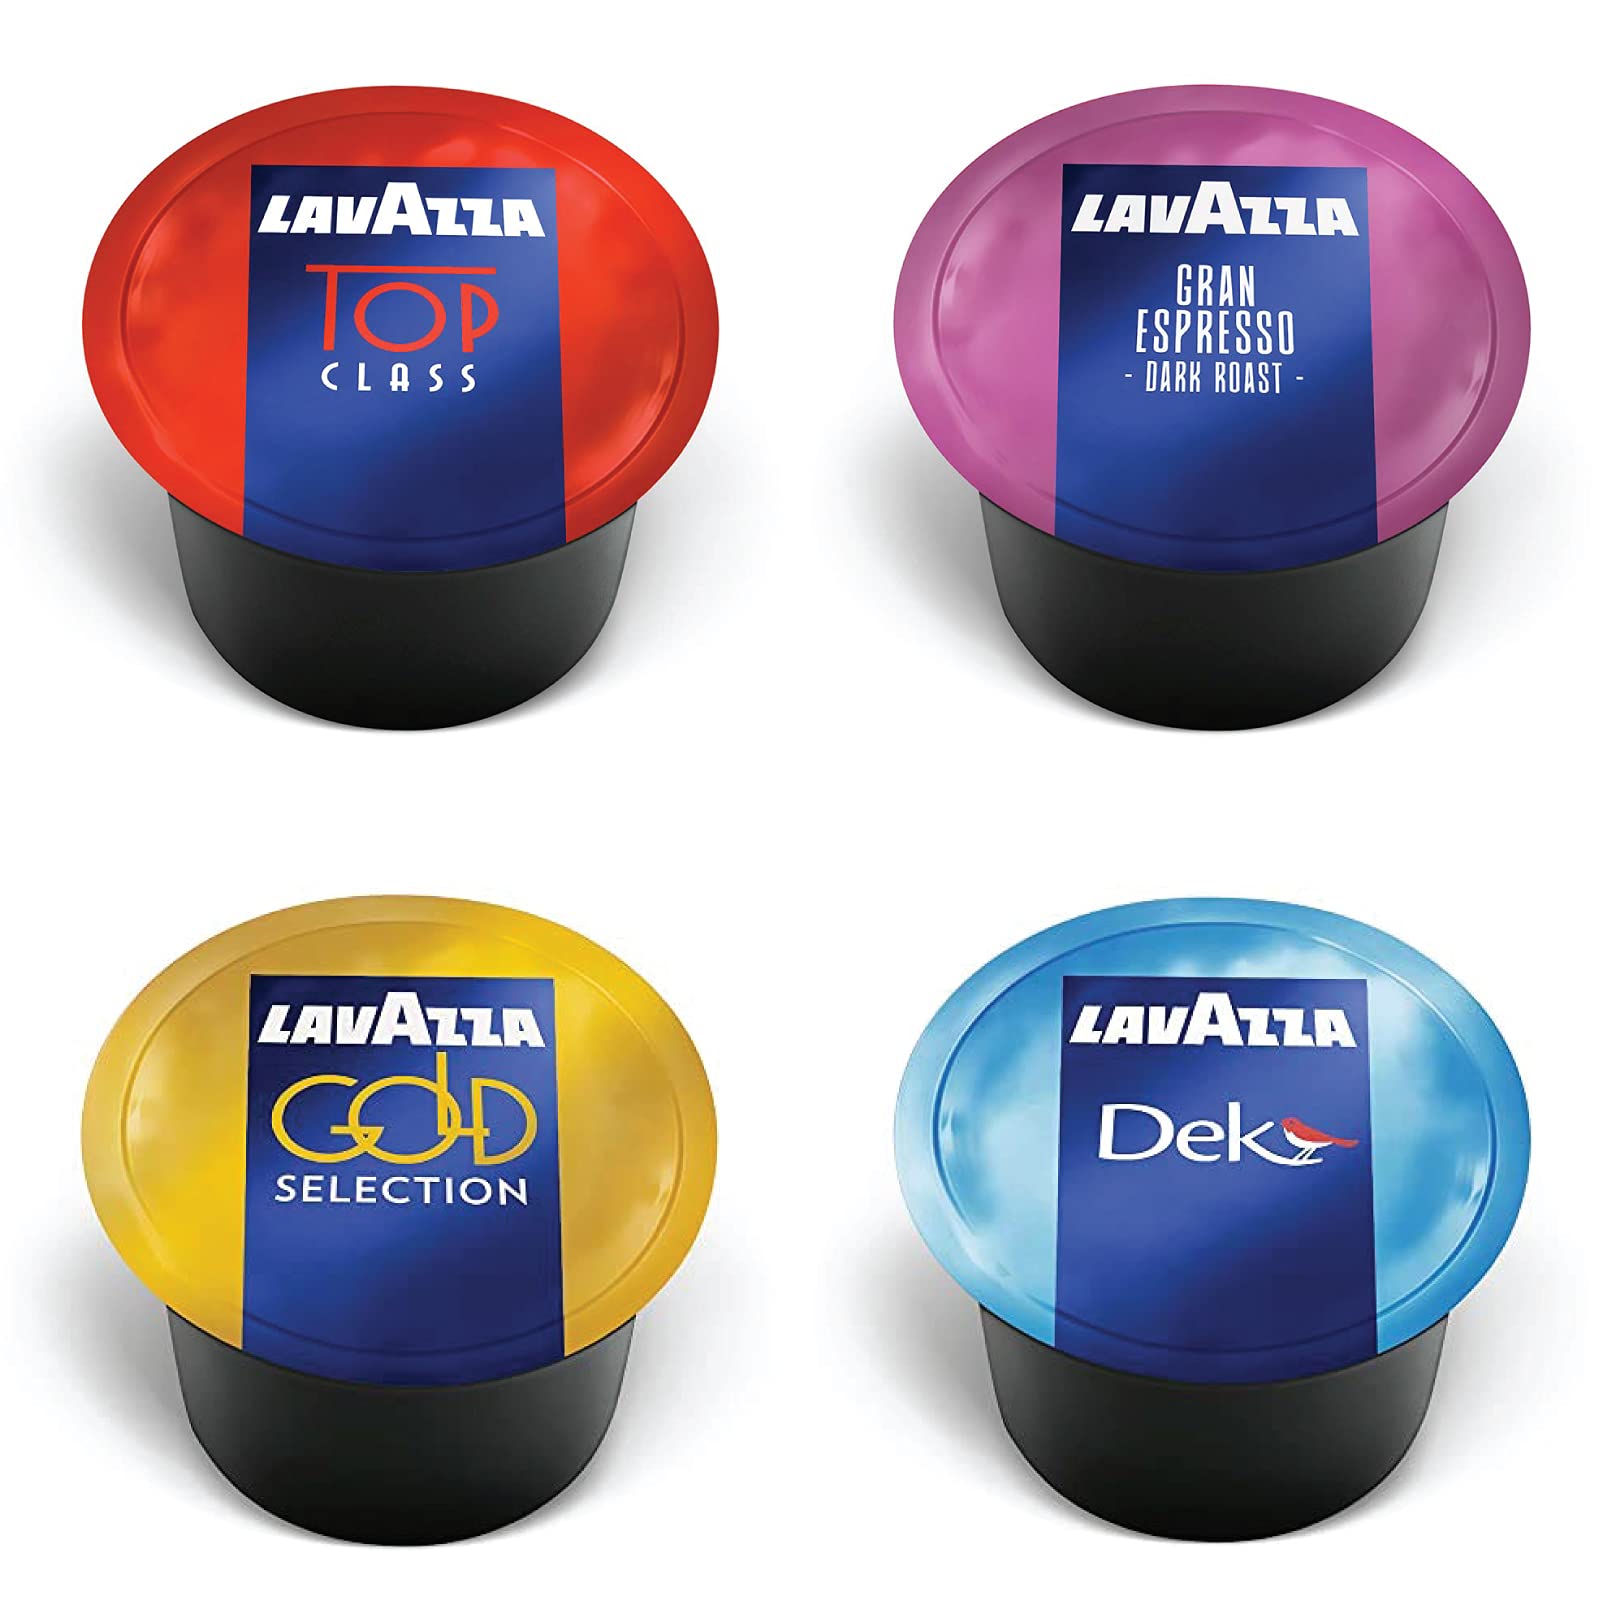 Lavazza Blue Capsules Coffee Pods, Best Value Variety Pack - Top Class, Gold Collection, Decaf Dek and Gran Espresso for Lavazza BLUE Single Serve ...